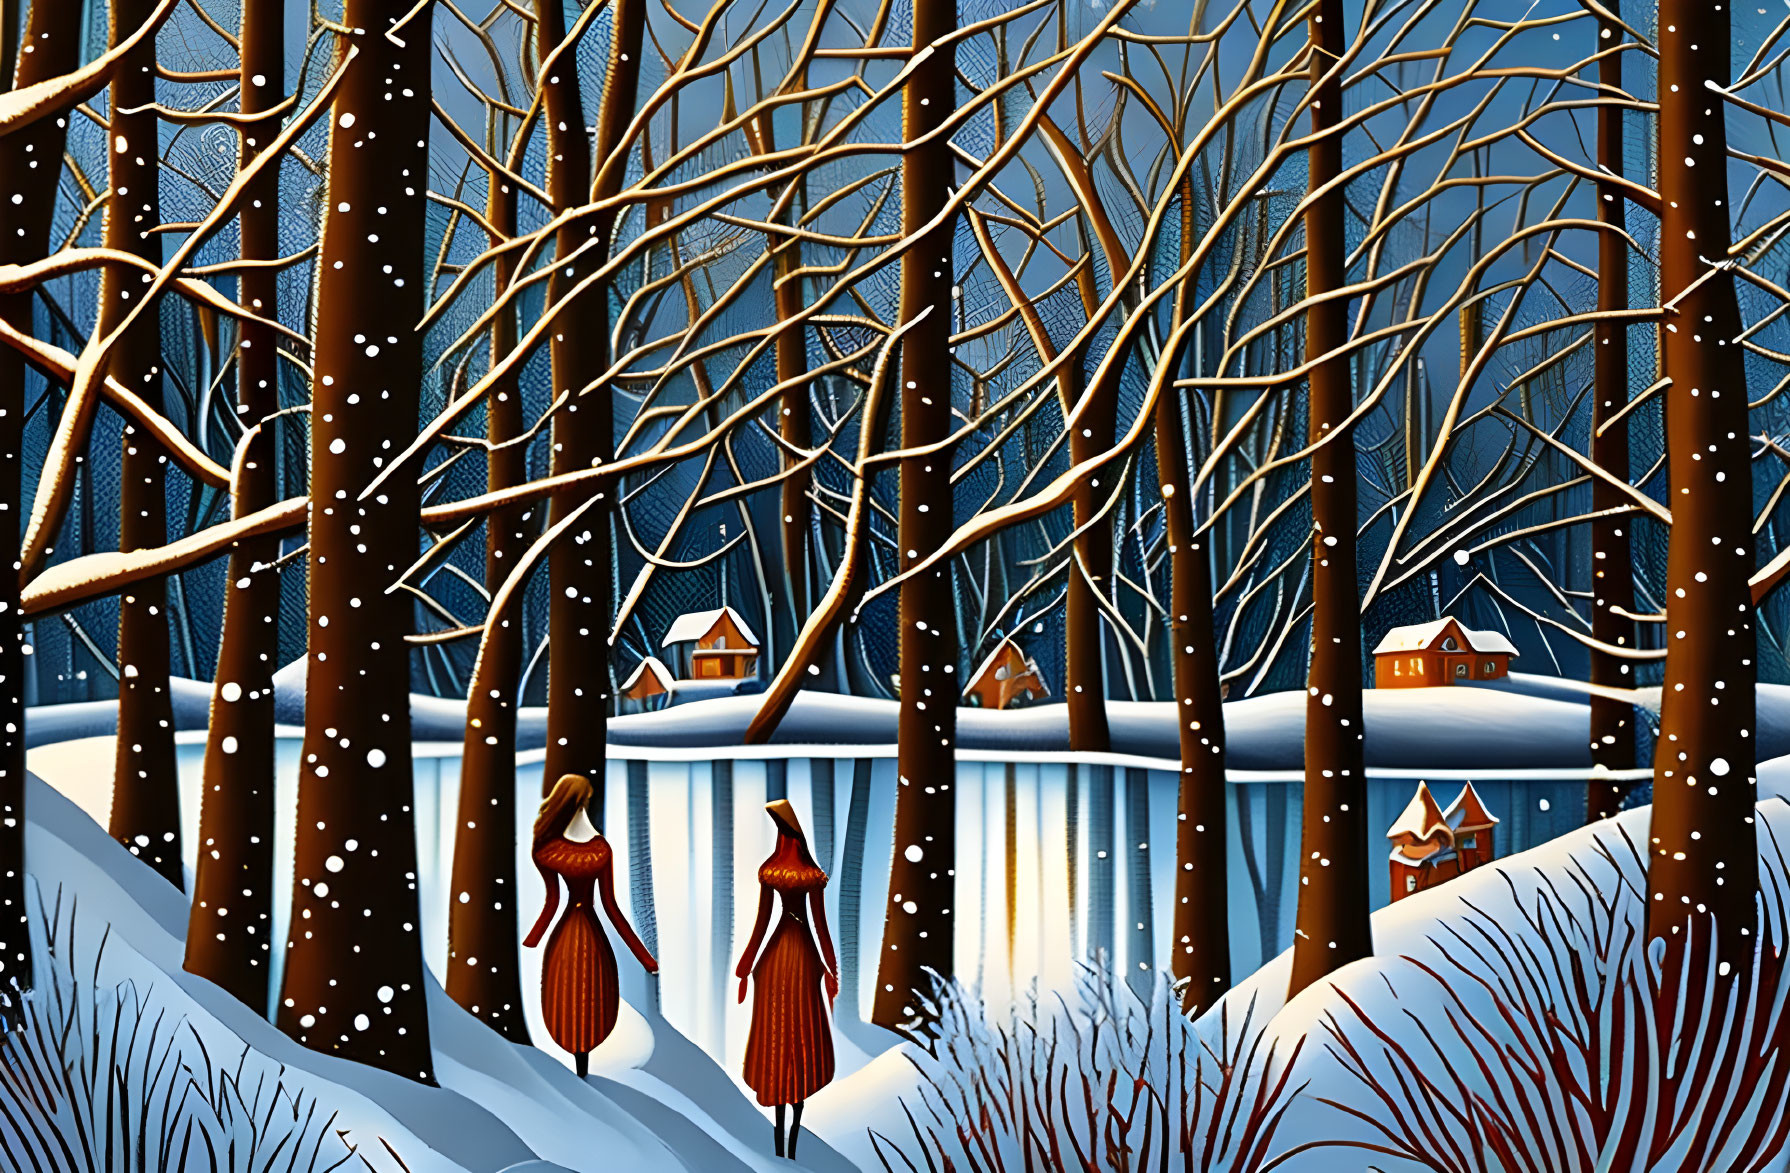 Snowy night landscape with figures in red cloaks and bare trees